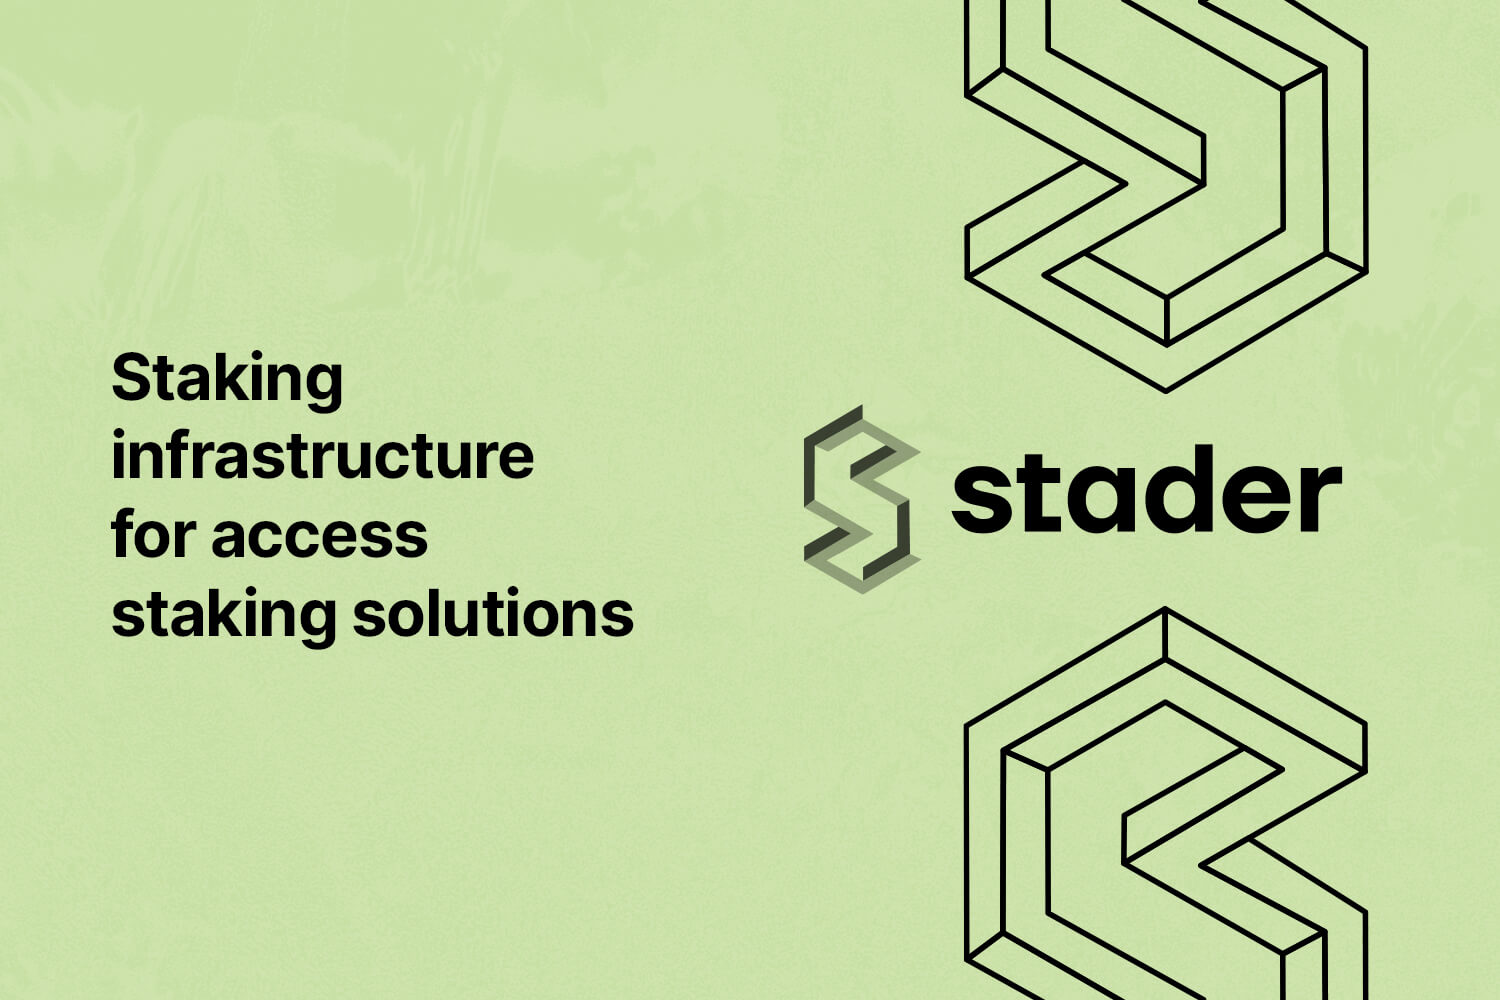 Who Is Stader Labs?